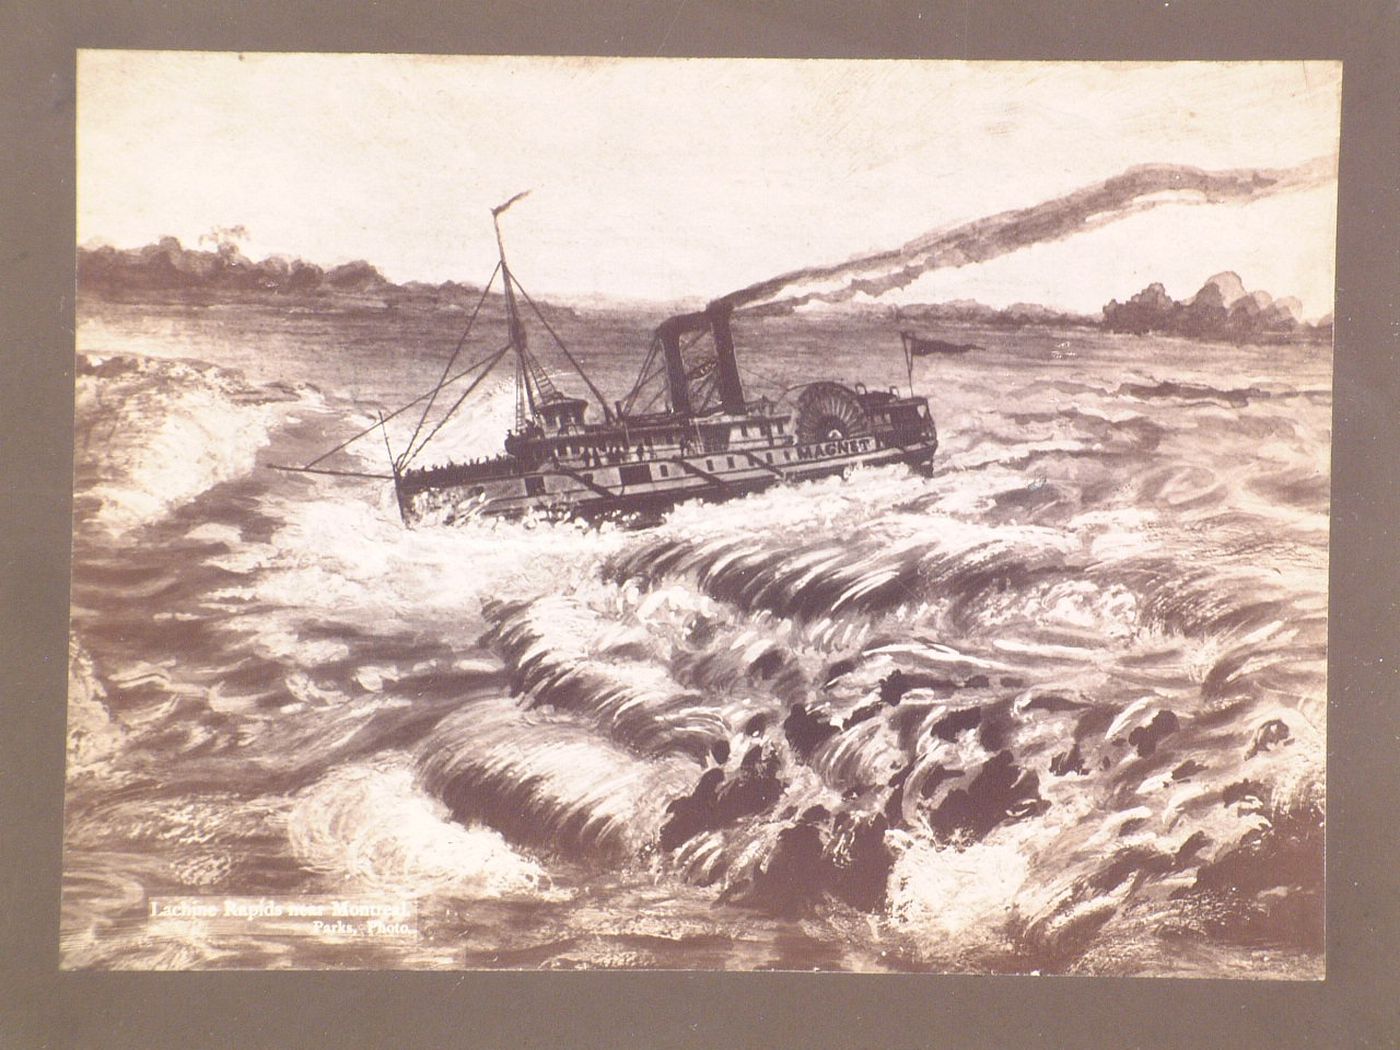 Photograph of a painting of a view of steam boat, Magnet, in the Lachine Rapids, near Montreal, Quebec, Canada